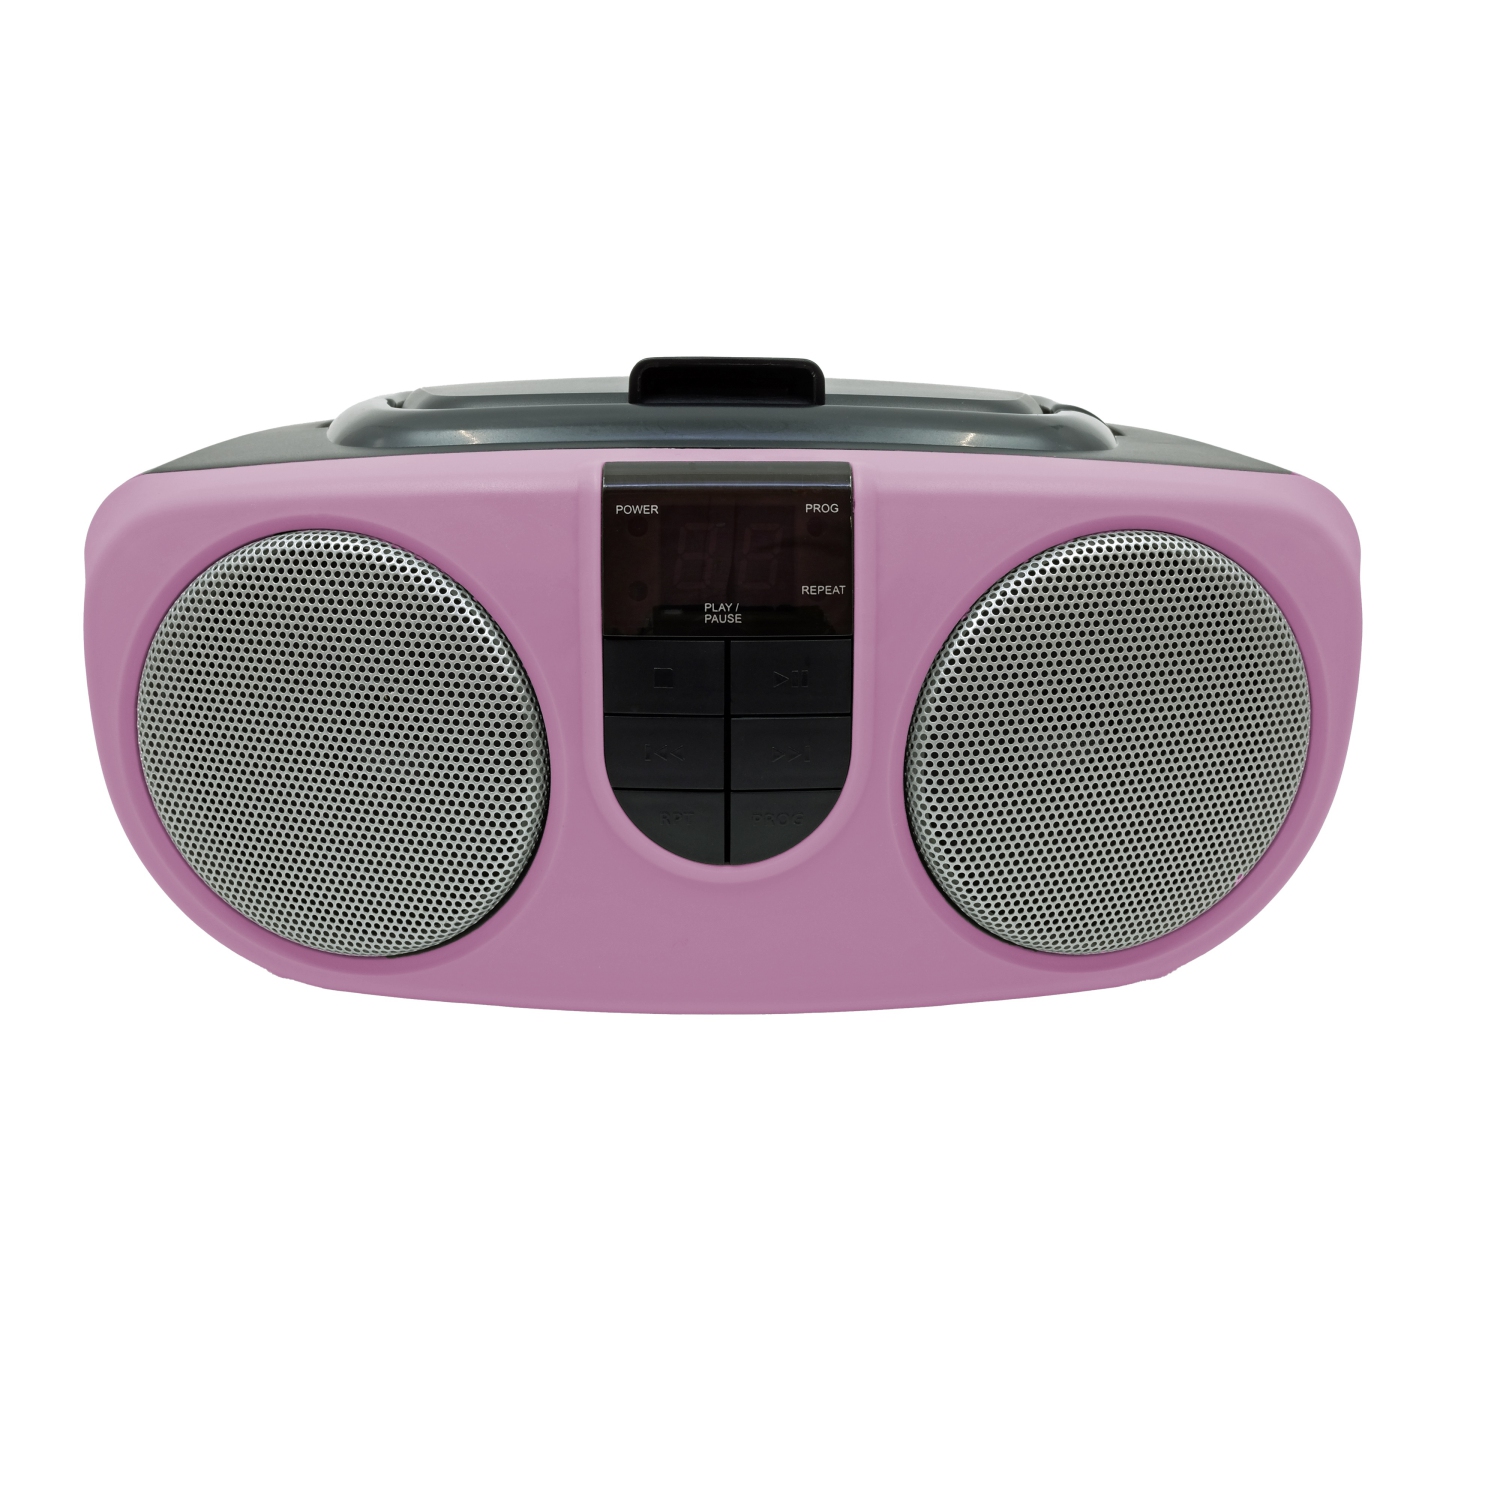 Proscan Portable CD Player with AM/FM Radio - Pink